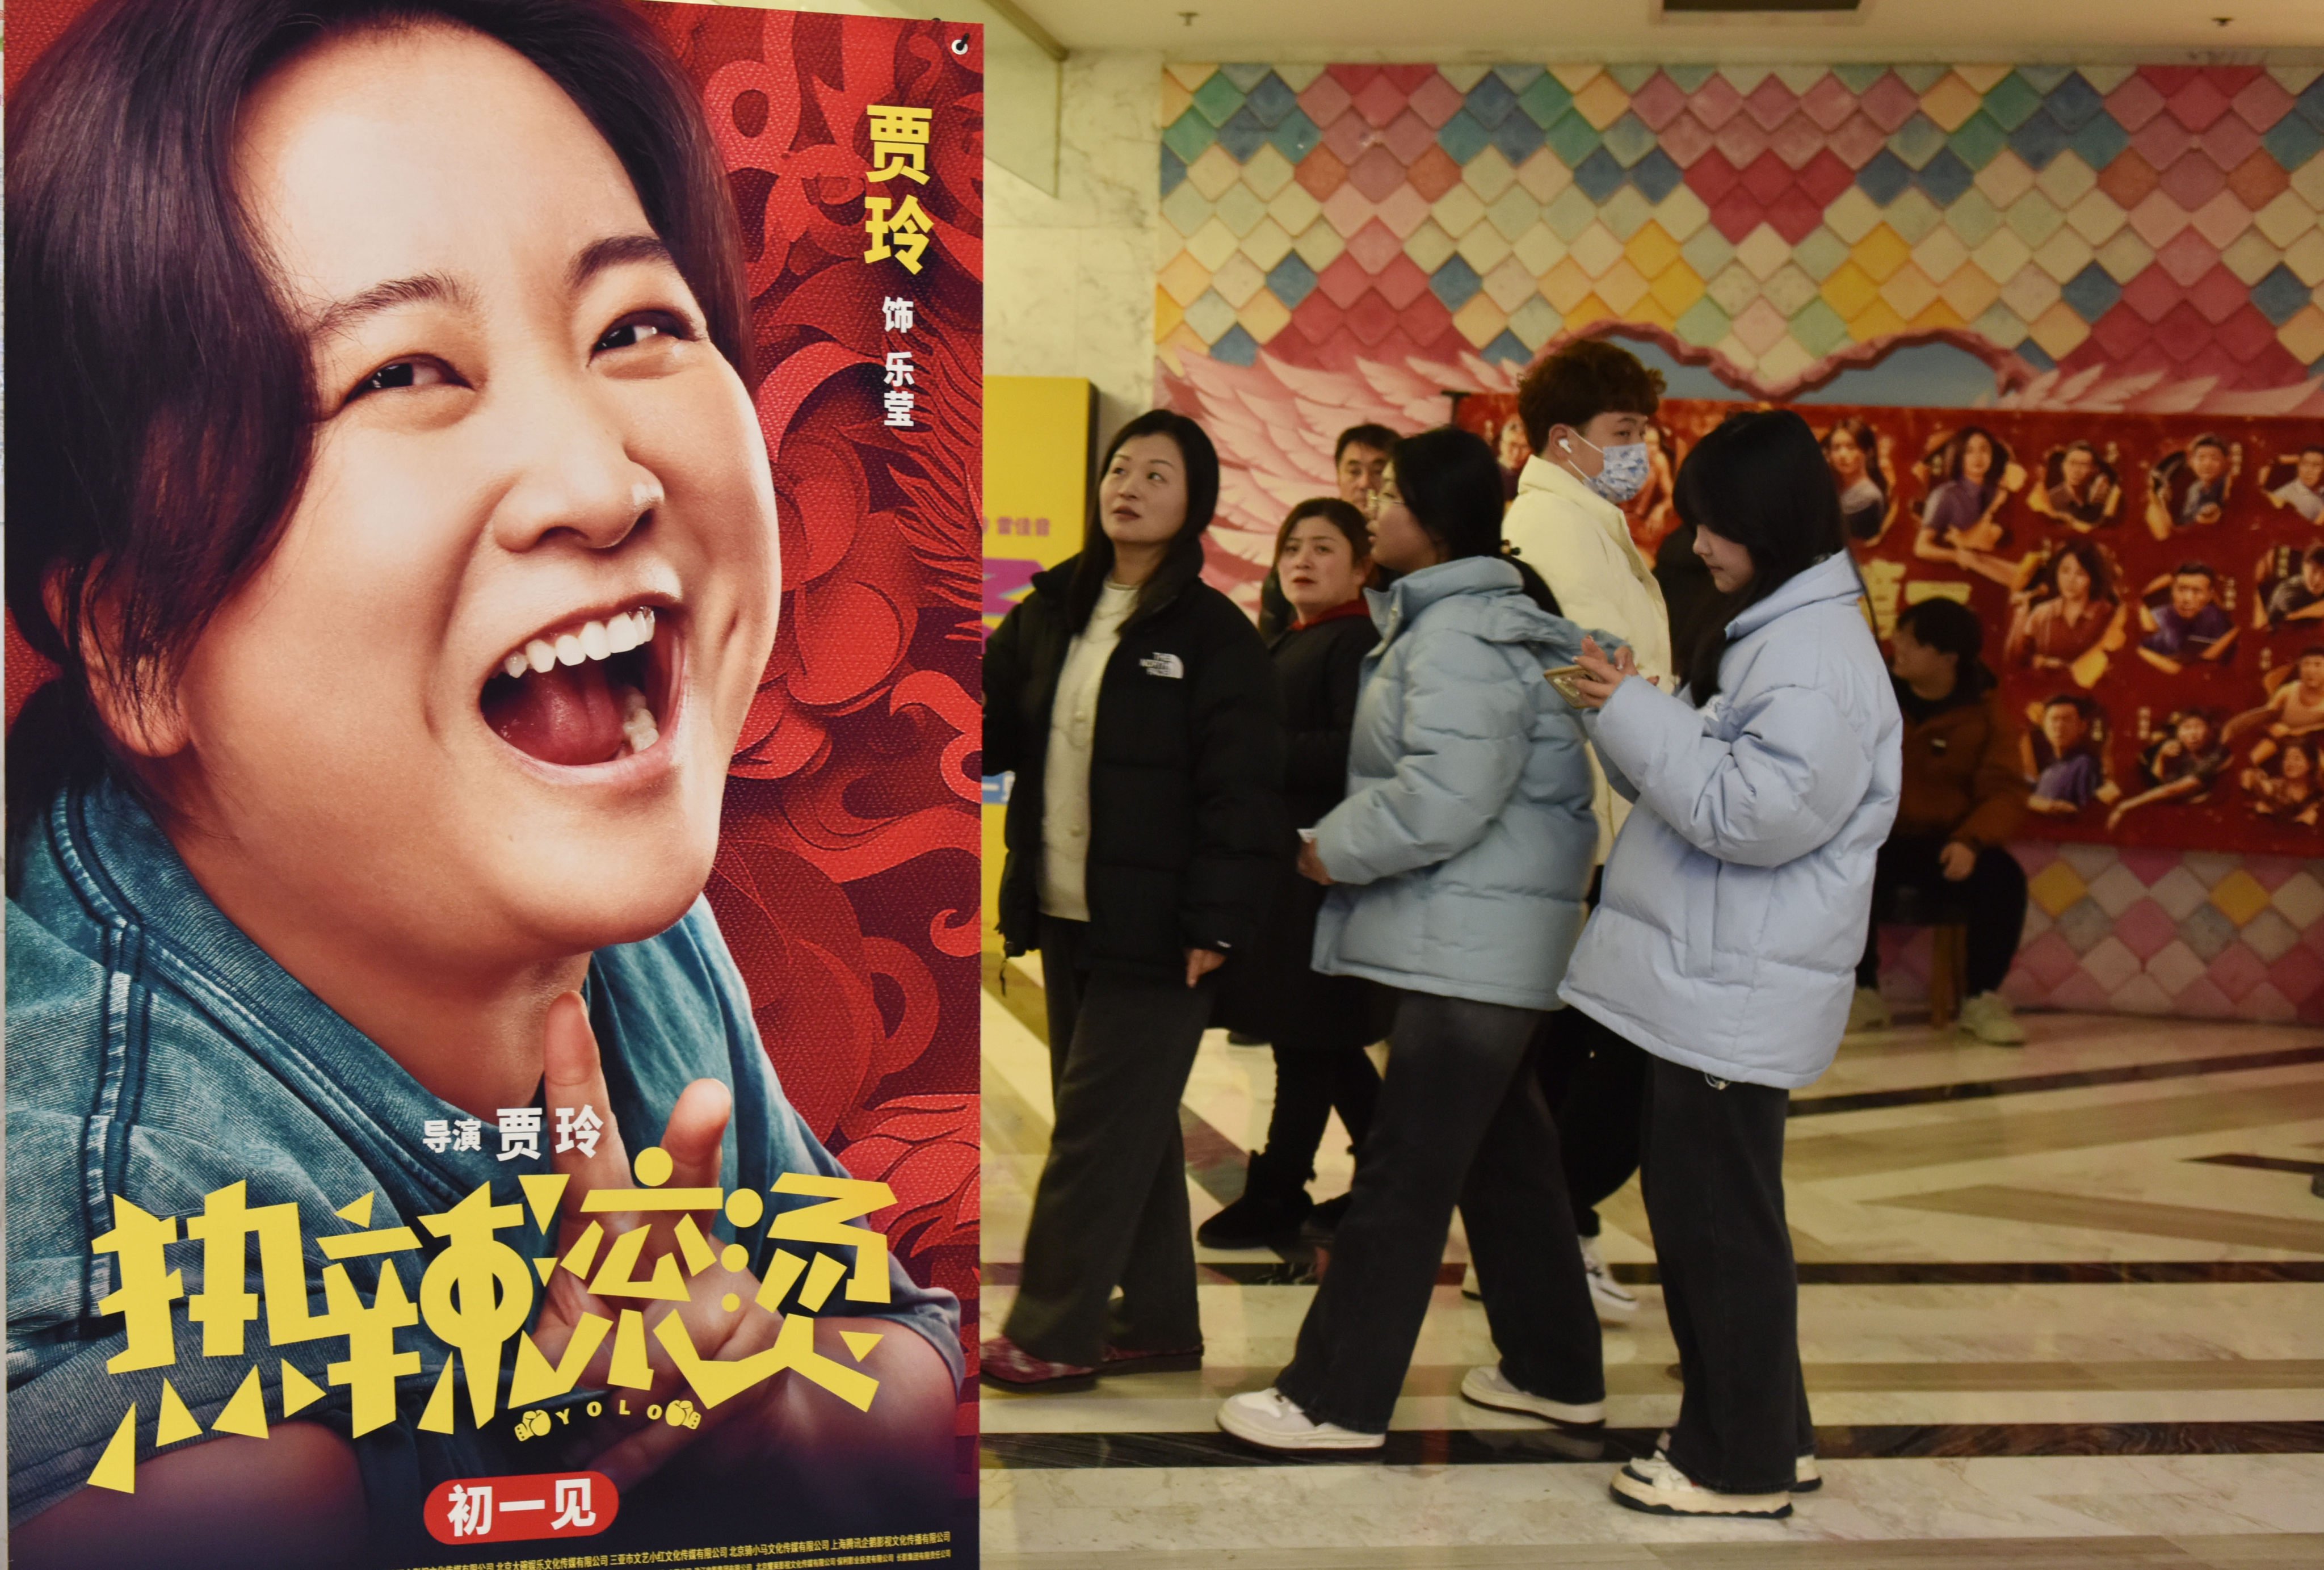 A poster of the film YOLO seen at a cinema in Fuyang, Anhui province of China, during the Spring Festival holiday. Photo: VCG via Getty Images